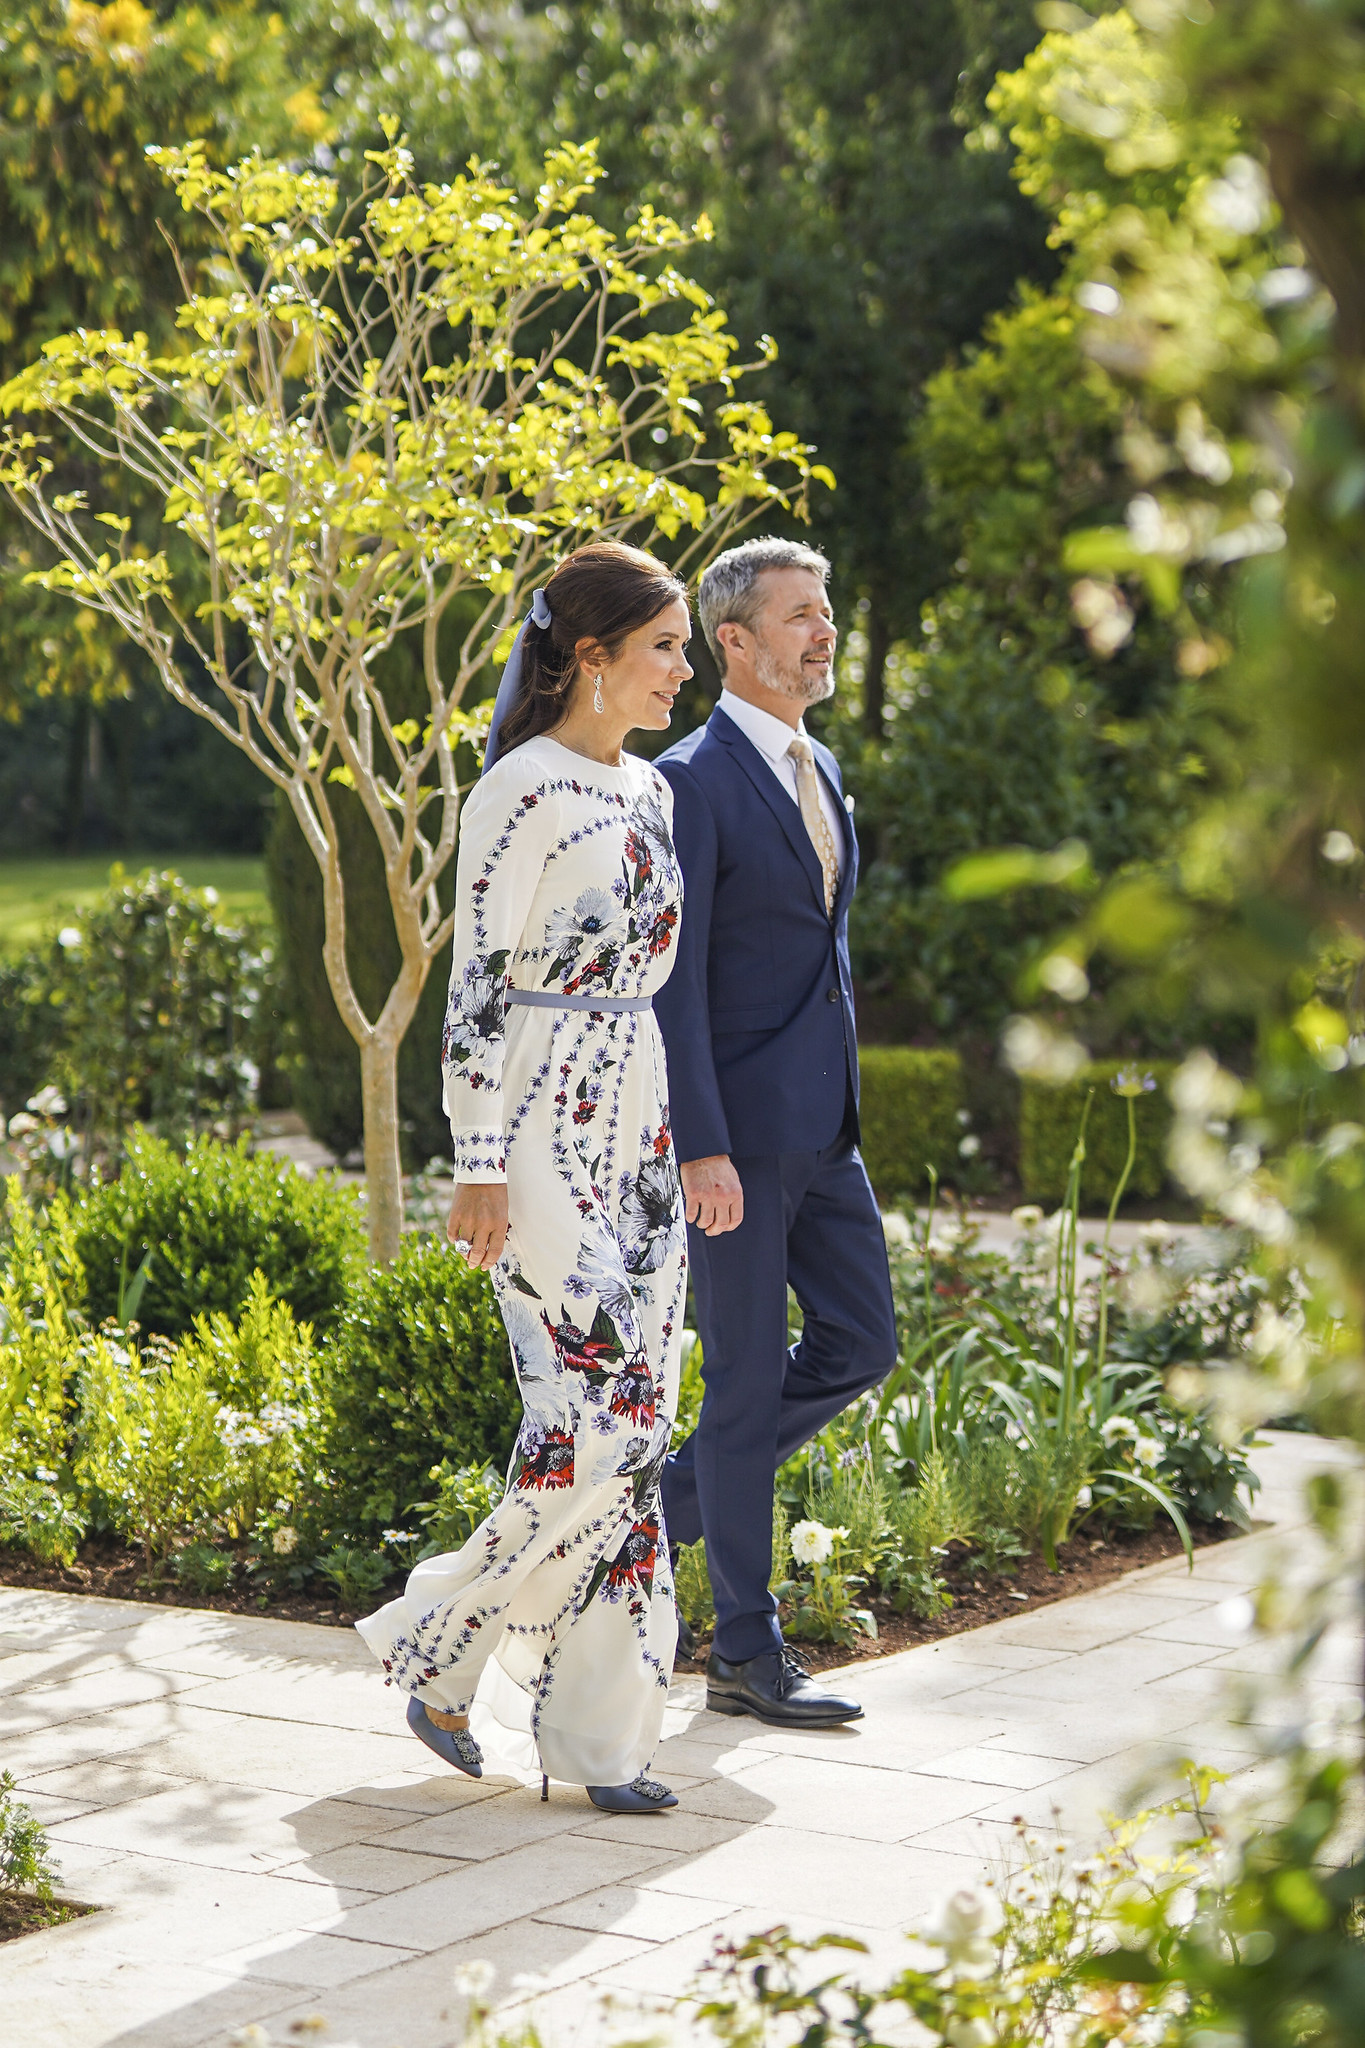 CROWN PRINCE FREDERIK OF DENMARK AND HIS WIFE MARY